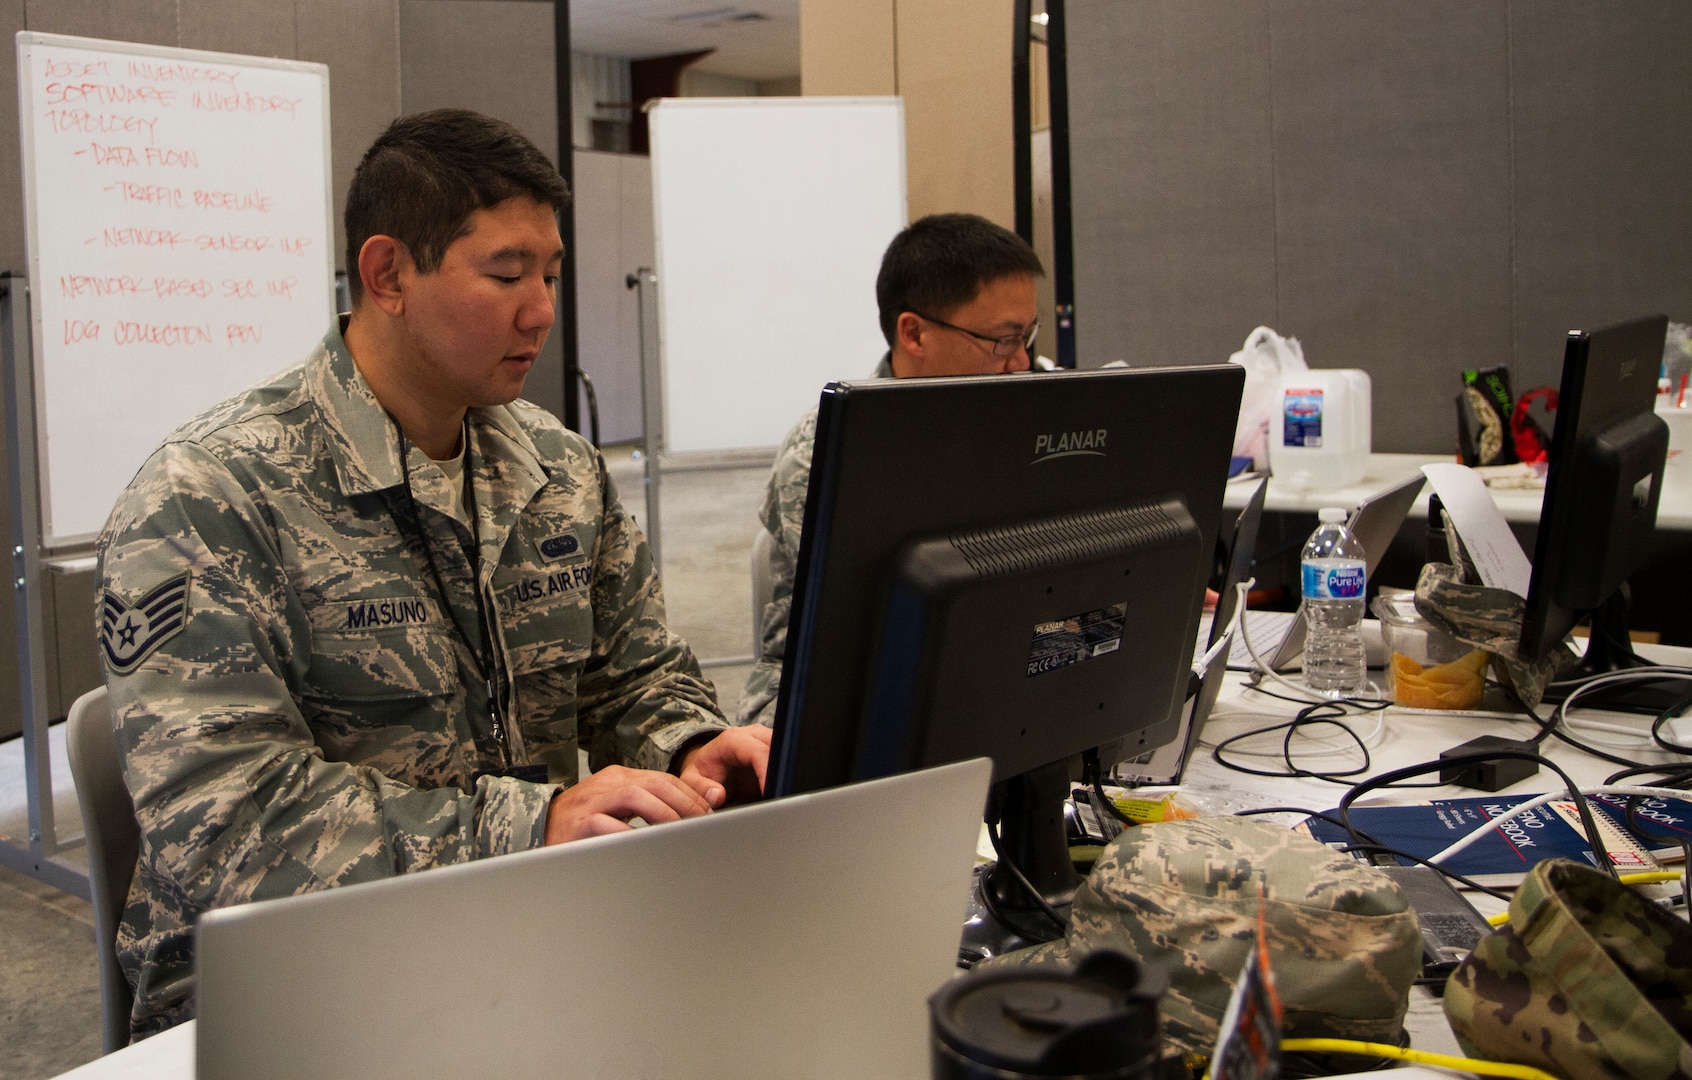 Staff Sgt. Marc Masuno from Aiea, Hawaii, and Hawaii Air Guard Cyber Mission Assurance Team works on his computer during the exercise portion, a scenario-based cyber security role-playing event, at Cyber Shield 19 at Camp Atterbury, Ind., April 16, 2019.  Cyber security is fundamental to enabling the Army’s offensive and defensive activities in order to win in and through cyberspace.